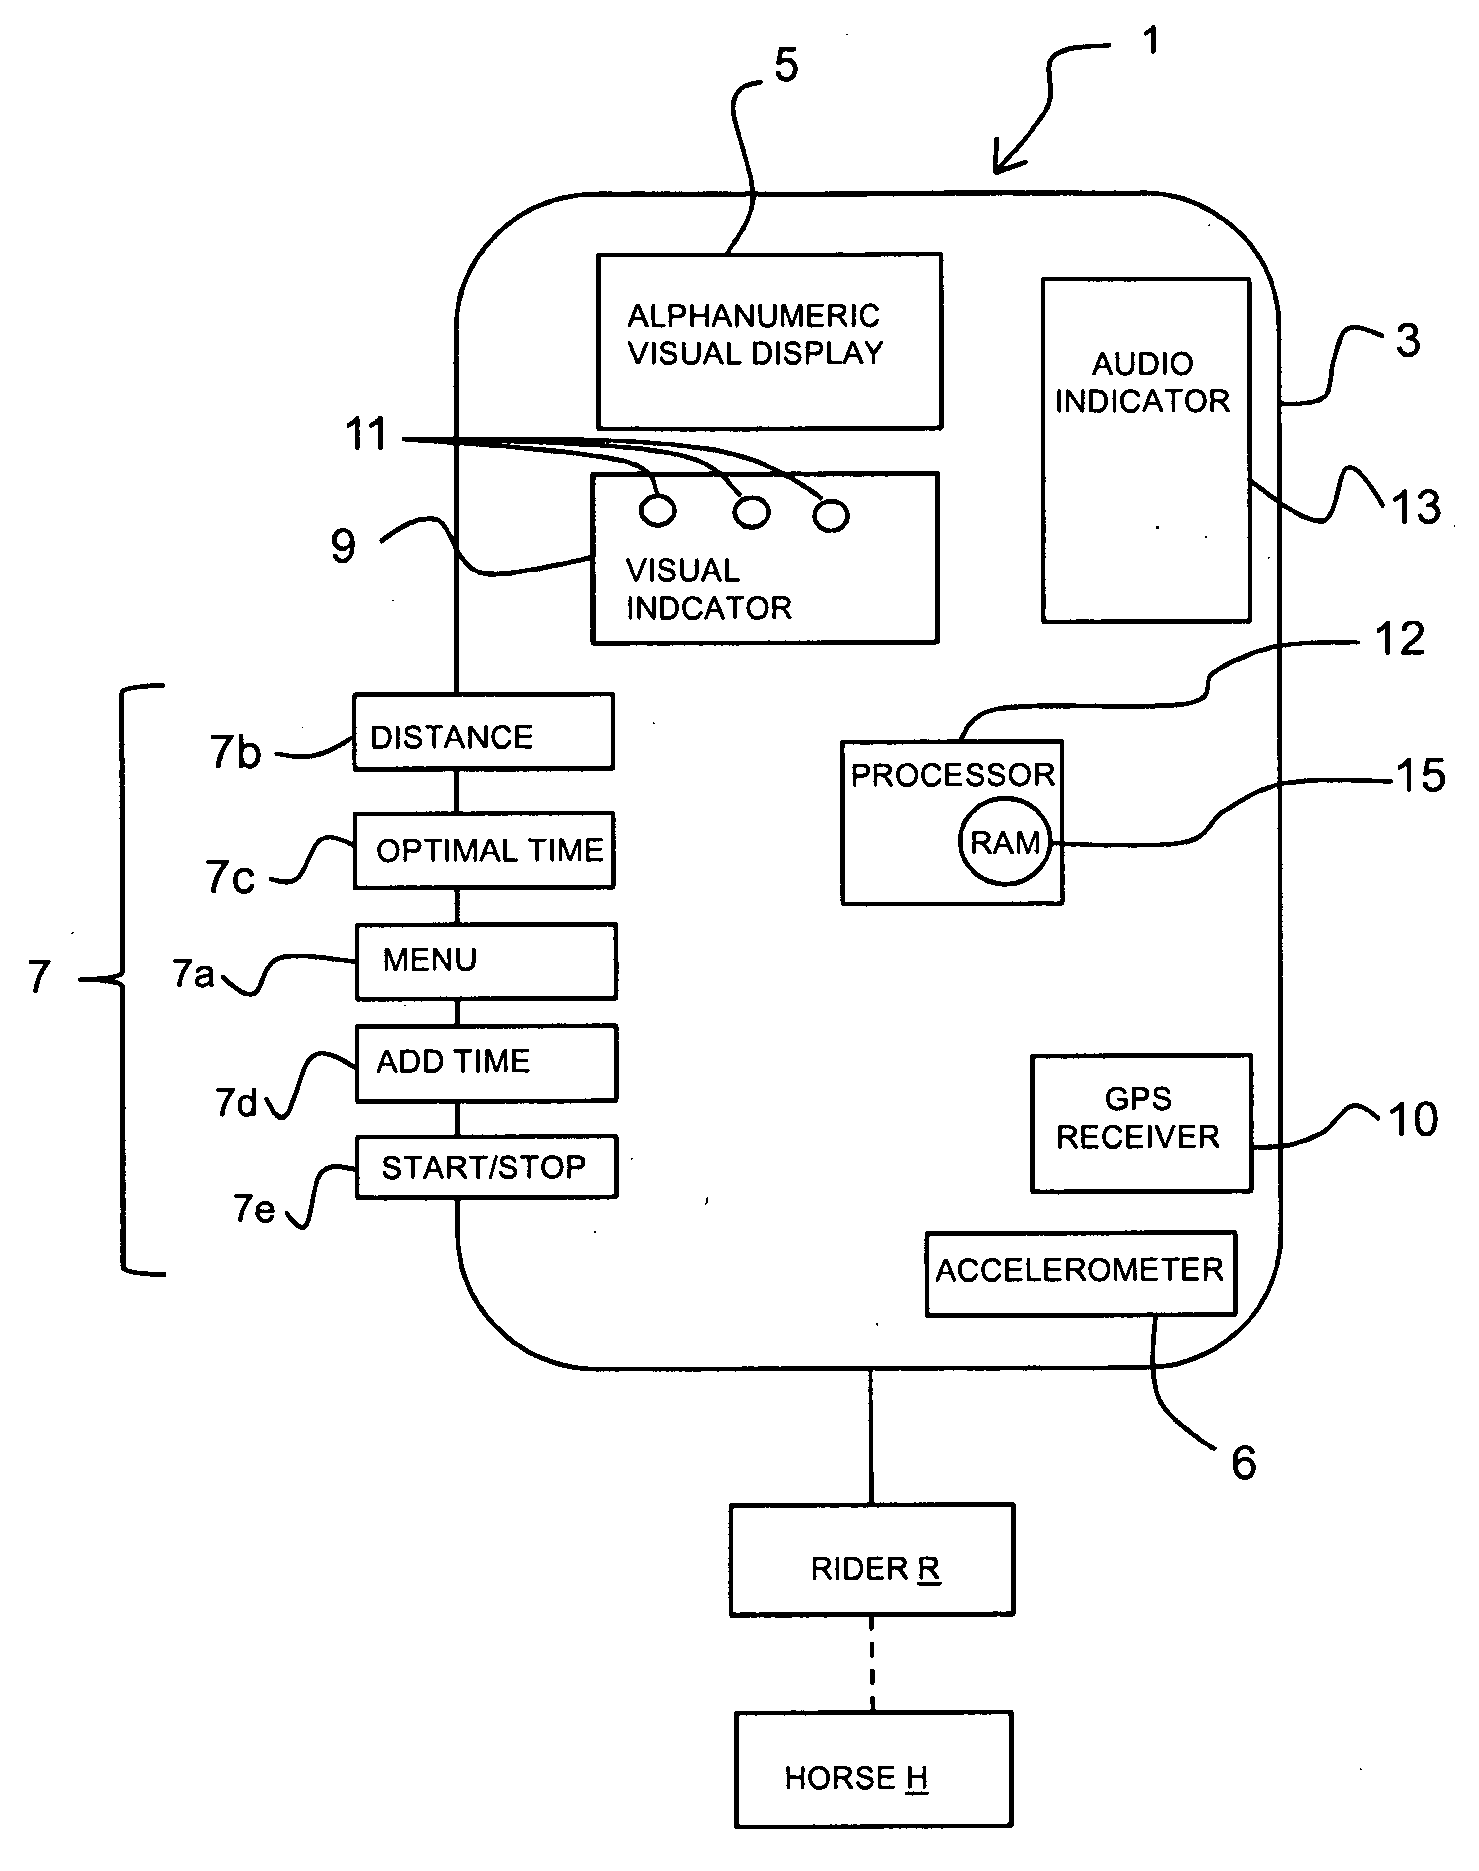 Method and apparatus for measuring and estimating subject motion in variable signal reception environments